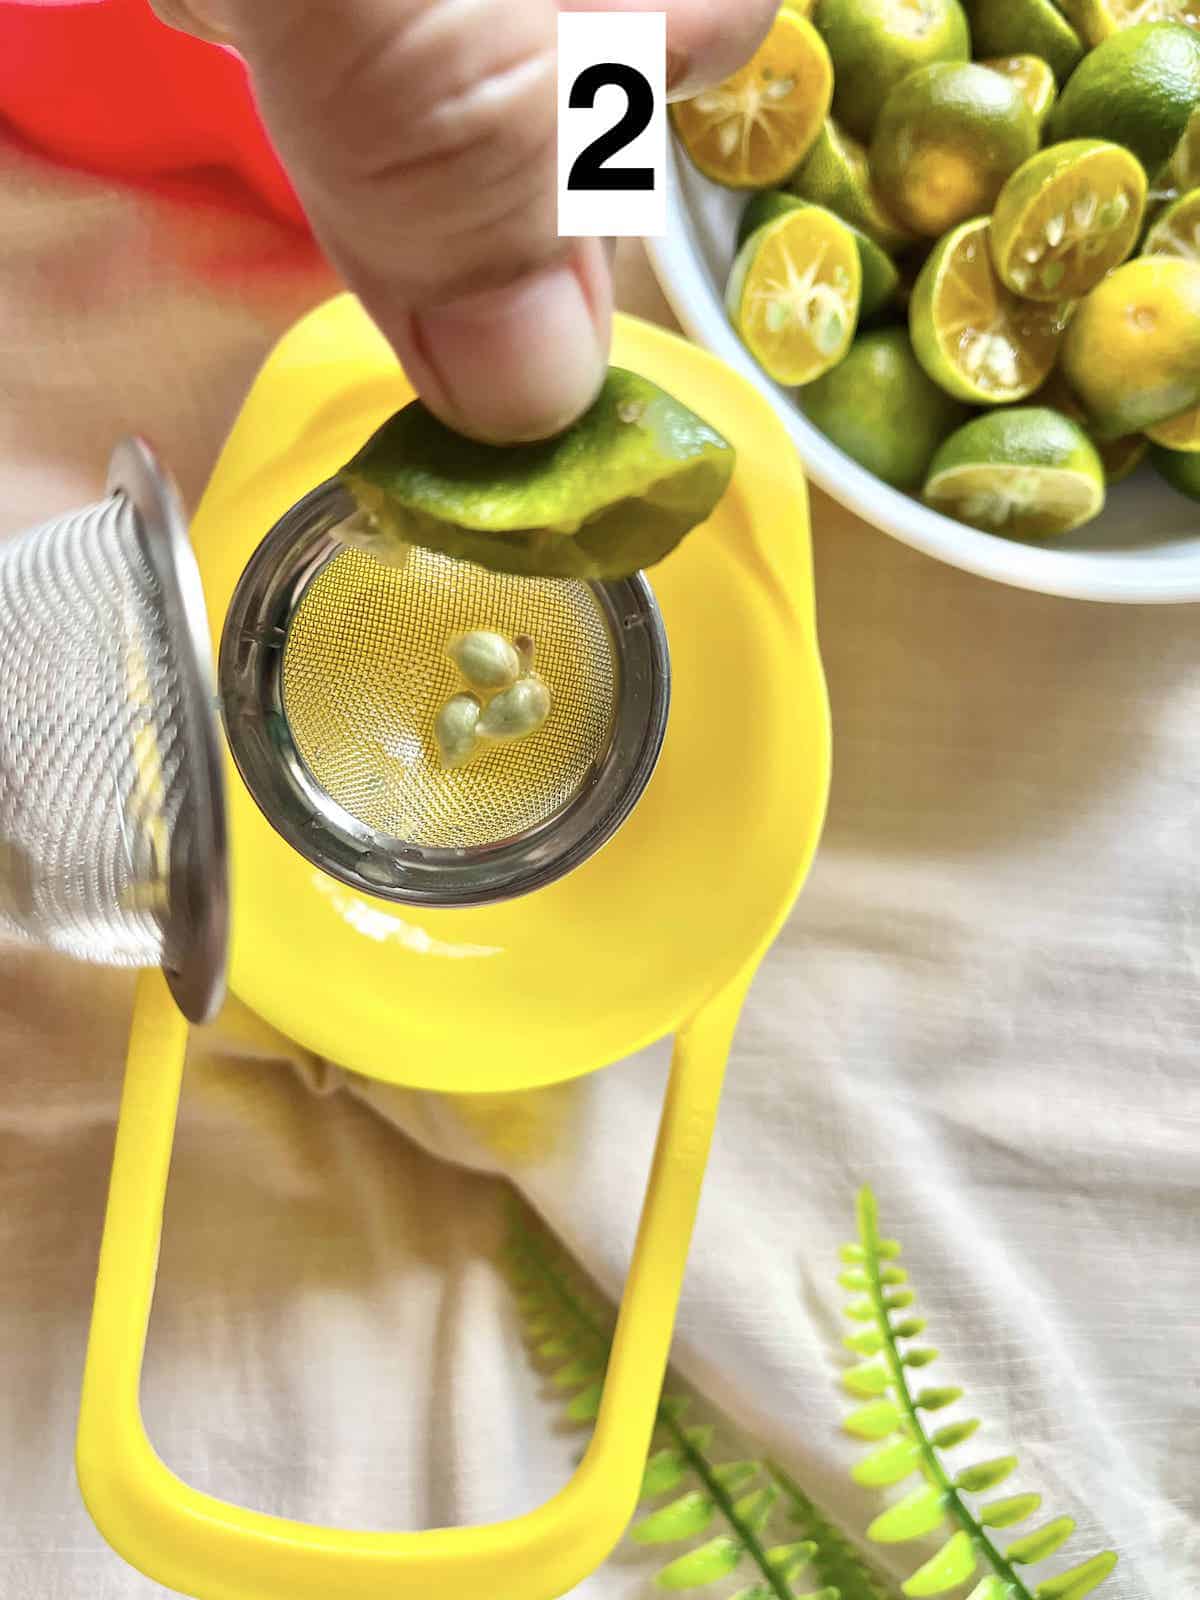 Squeezing halved calamansi limes to get juice.